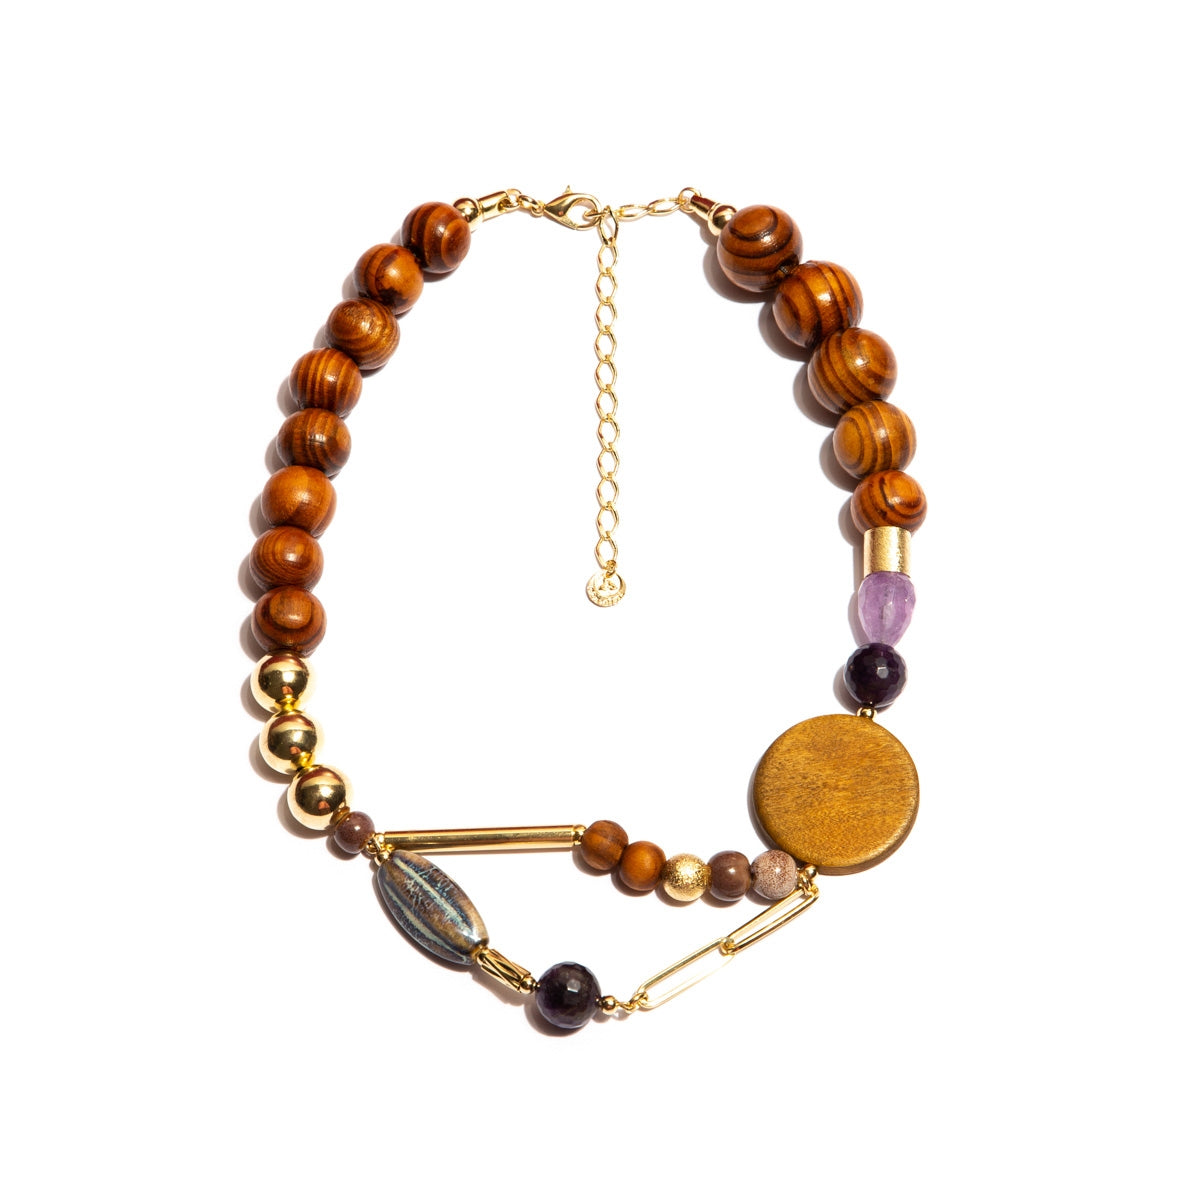 Gold-Plated Fashion Necklace With Wood, Amethyst And Ceramic